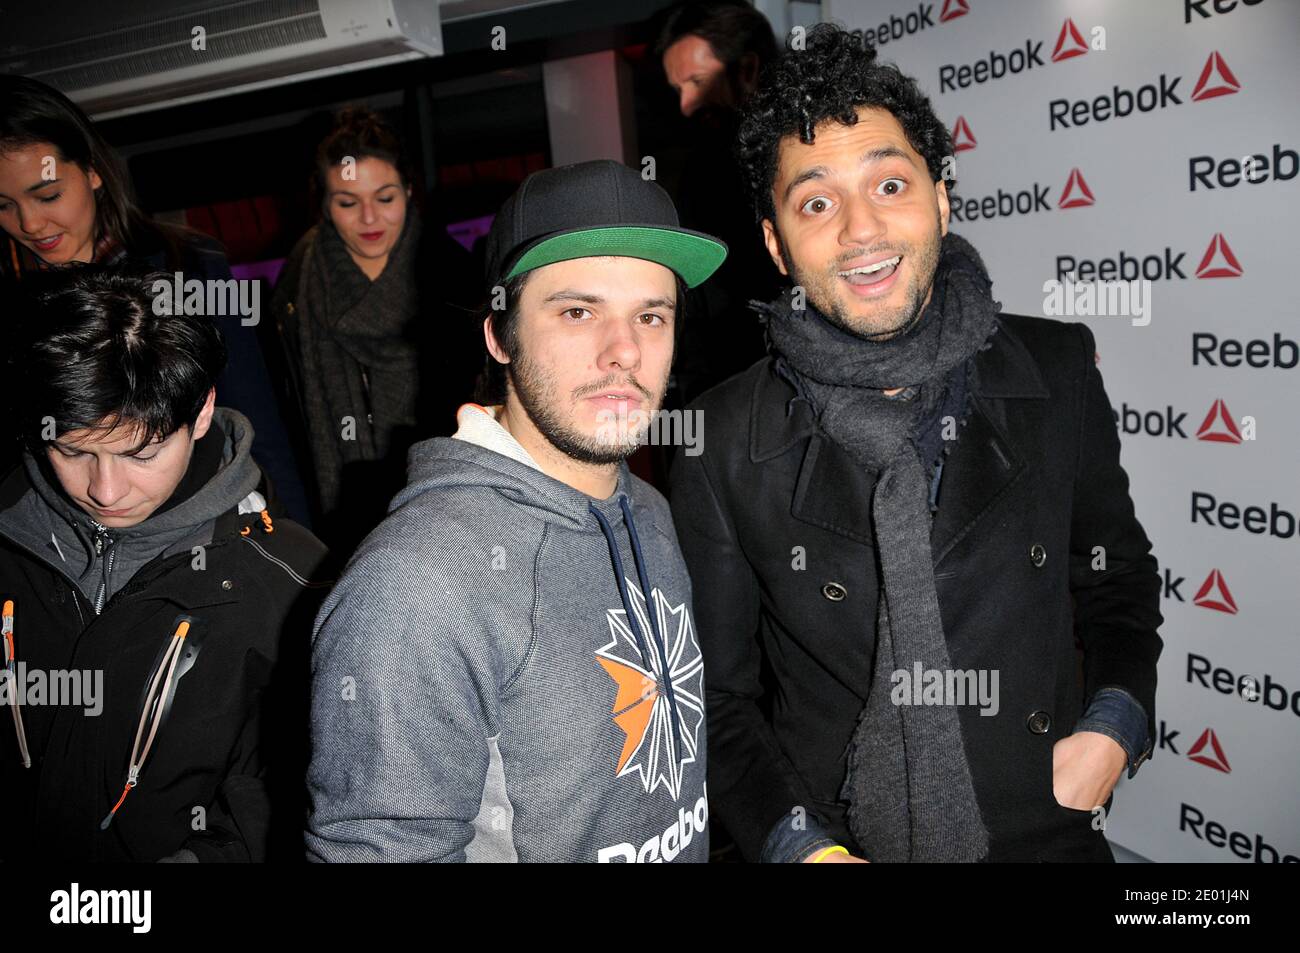 Tony Saint Laurent and Orelsan attending the Reebok Concept Store Opening  event at Avenue de L'Opera in Paris, France on December 4, 2013. Photo by  Thierry Plessis/ABACAPRESS.COM Stock Photo - Alamy